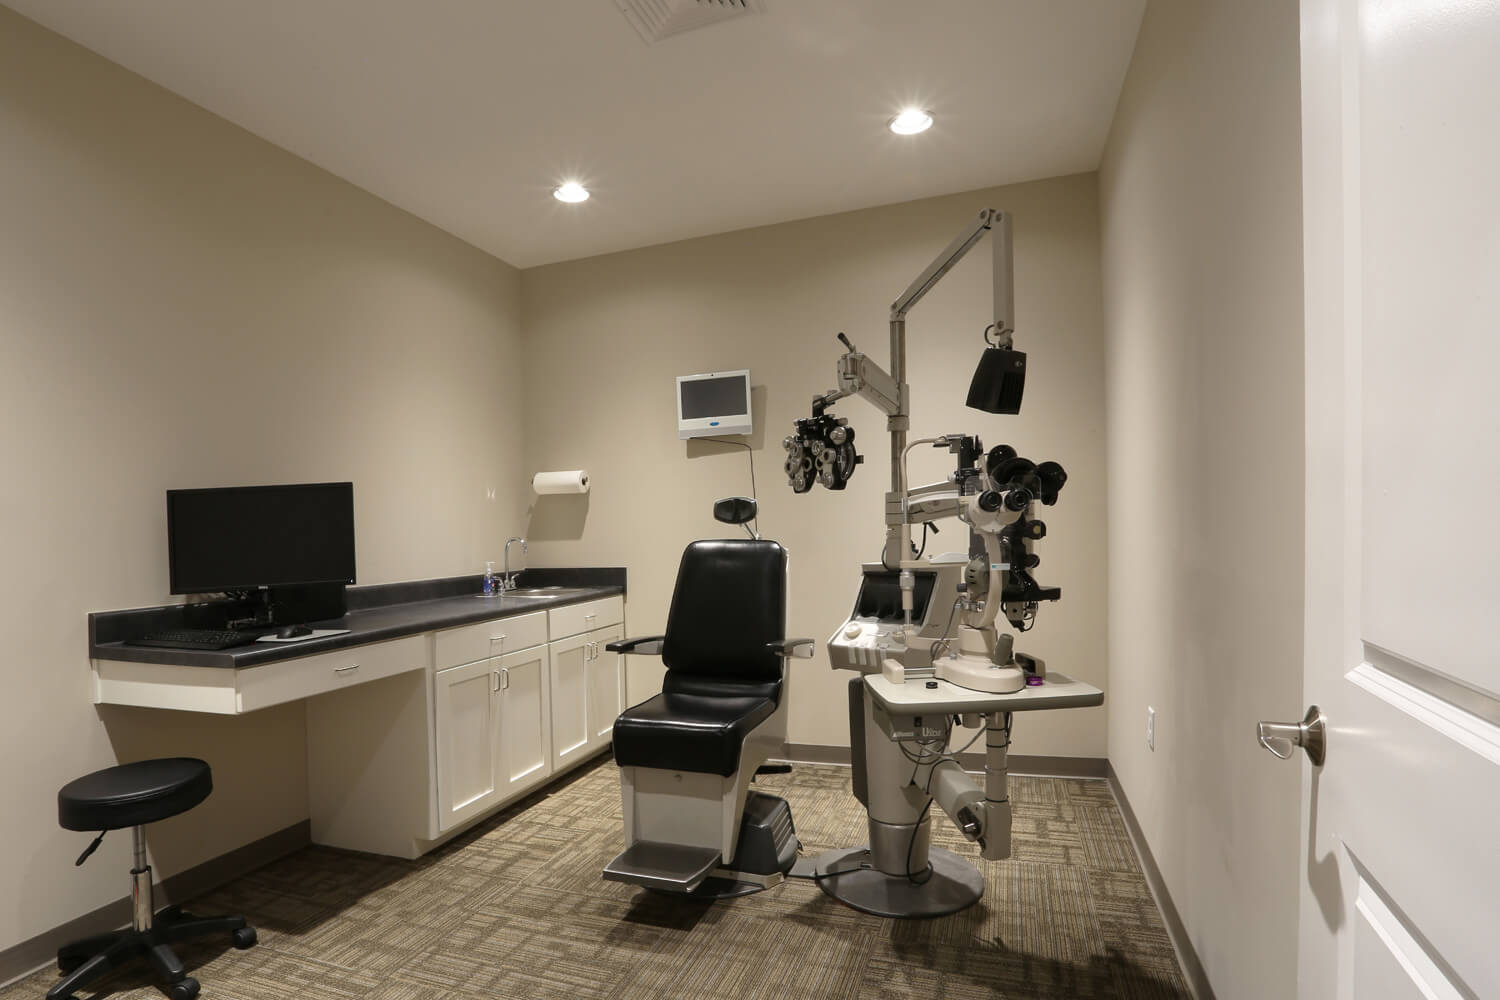 Pike Road Family Eyecare Designed by Foshee Architecture – Optometry Exam Room